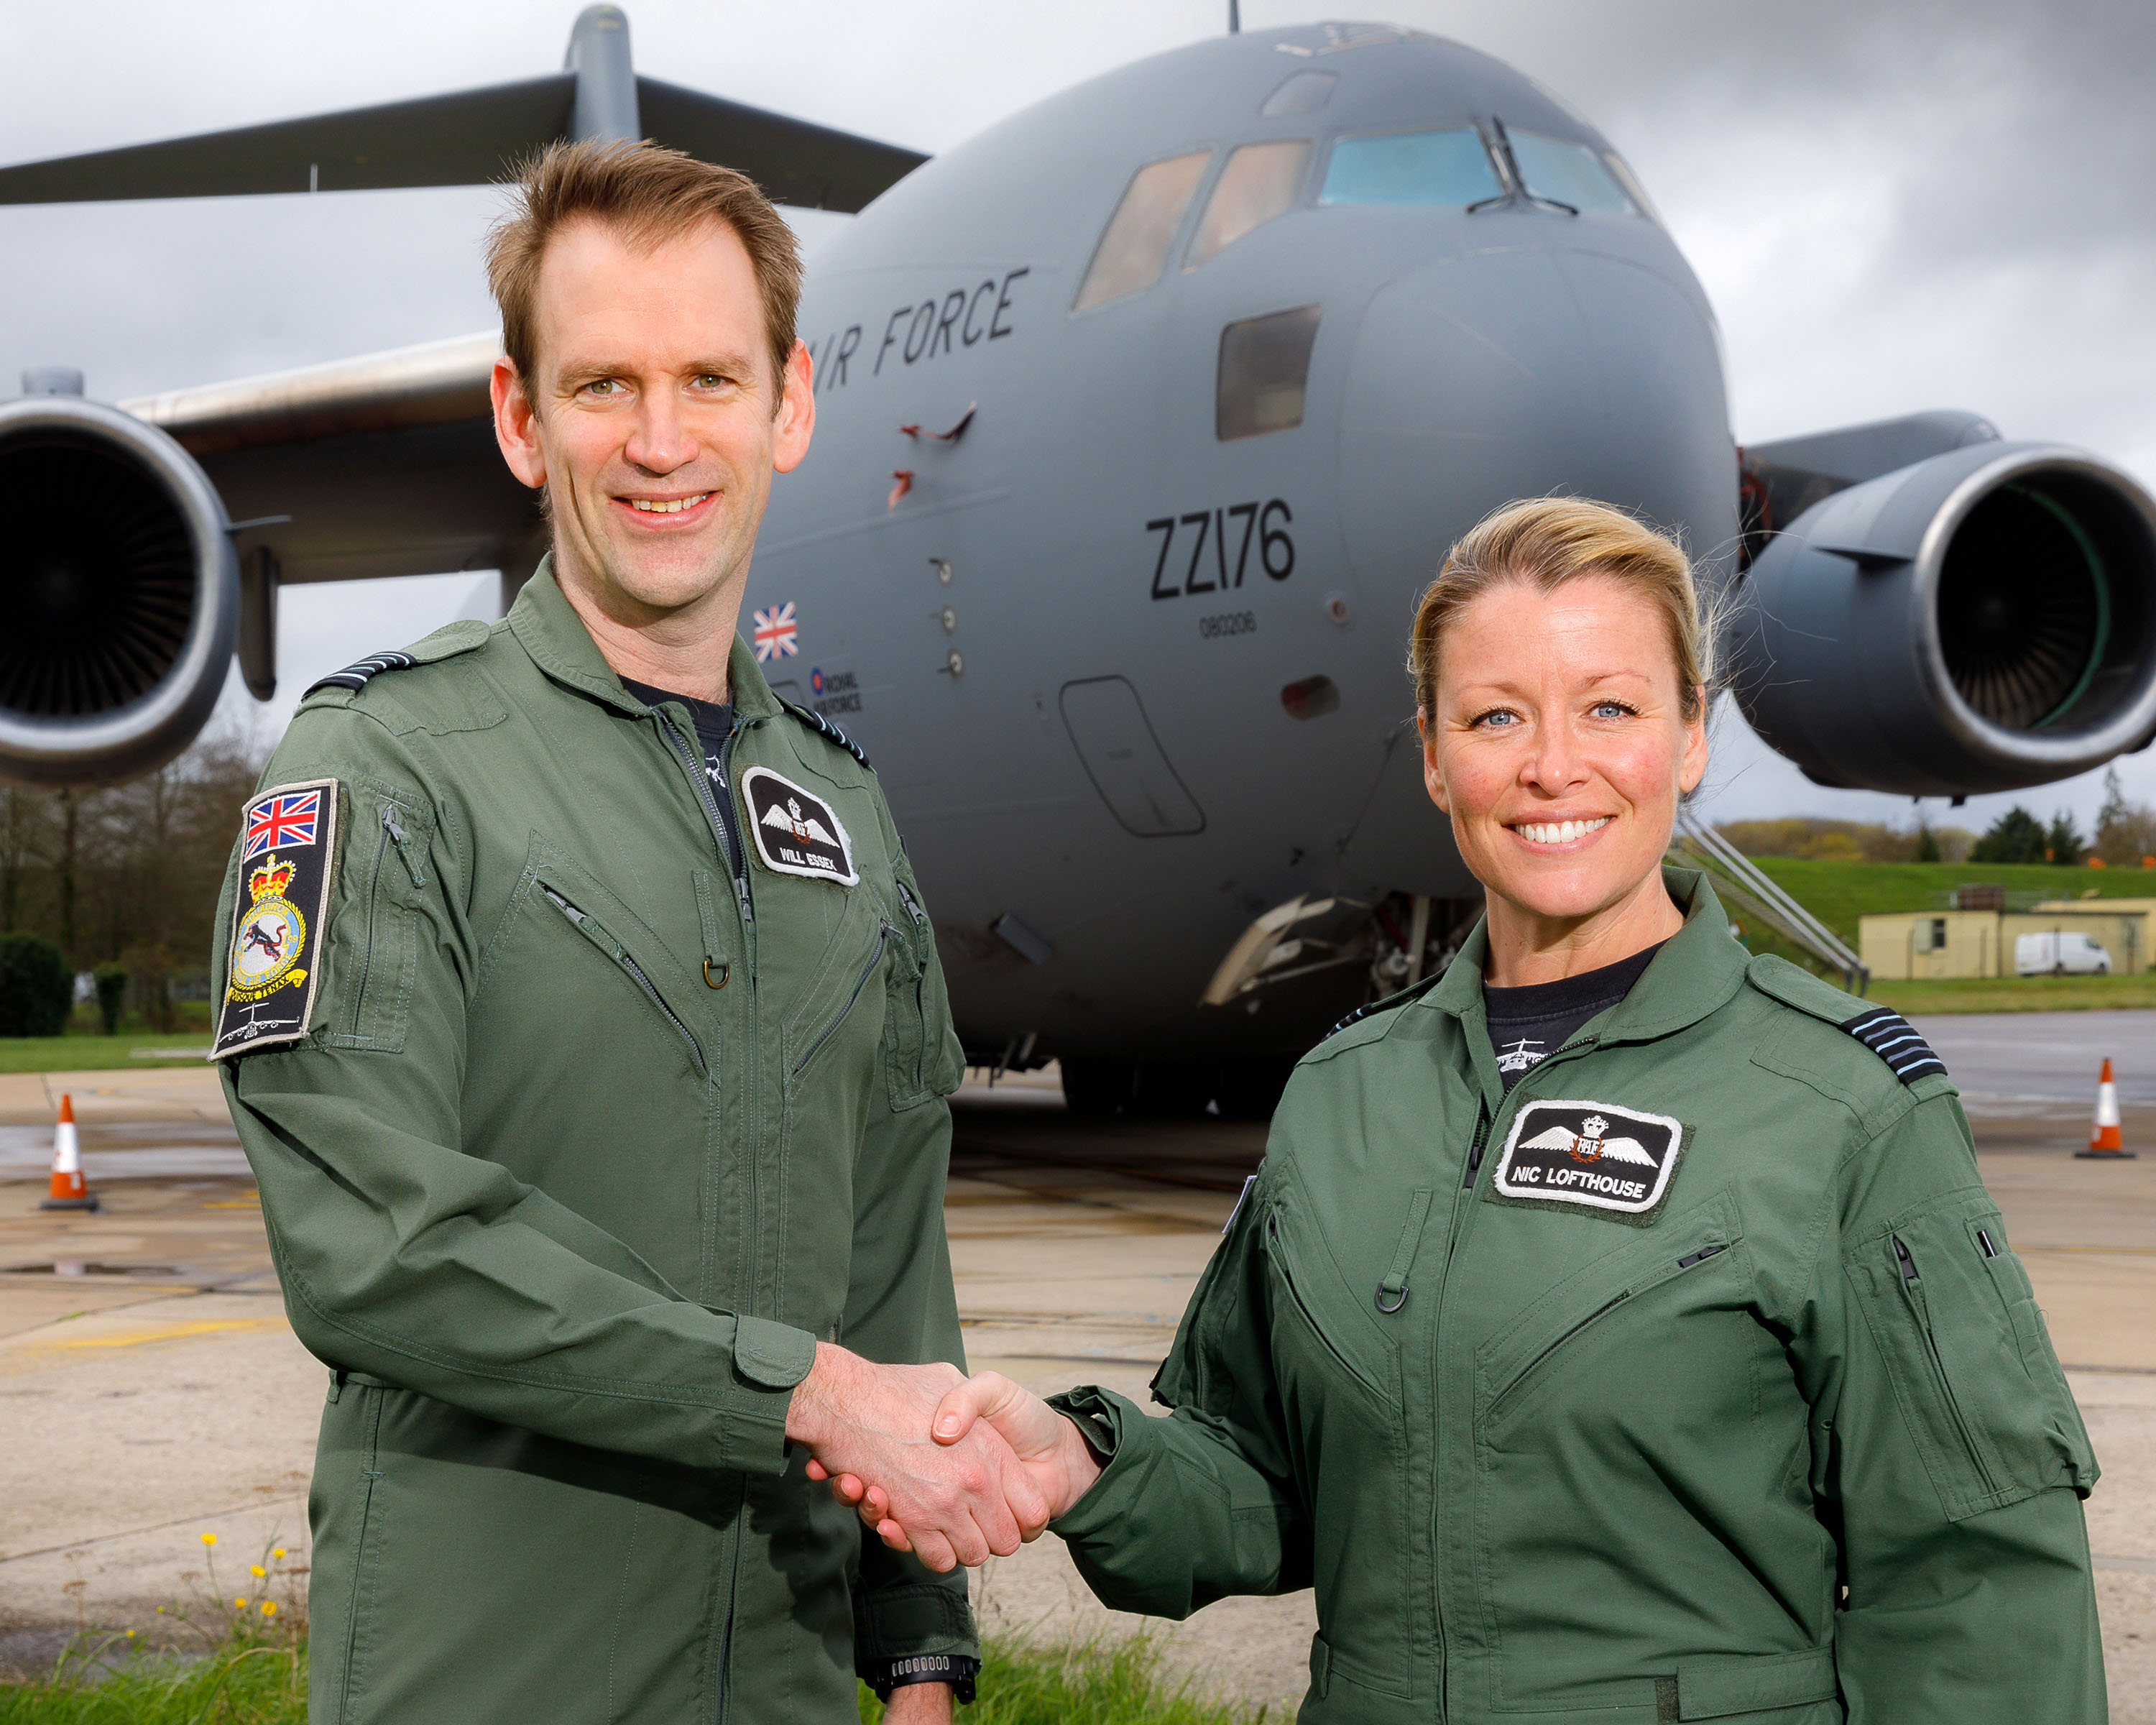 Command of Number 99 Squadron, based at RAF Brize Norton, has been officially handed over from Wing Commander Will Essex to Wing Commander Nikki Lofthouse, who becomes the first female commander of the Squadron, now the largest in the Royal Air Force.